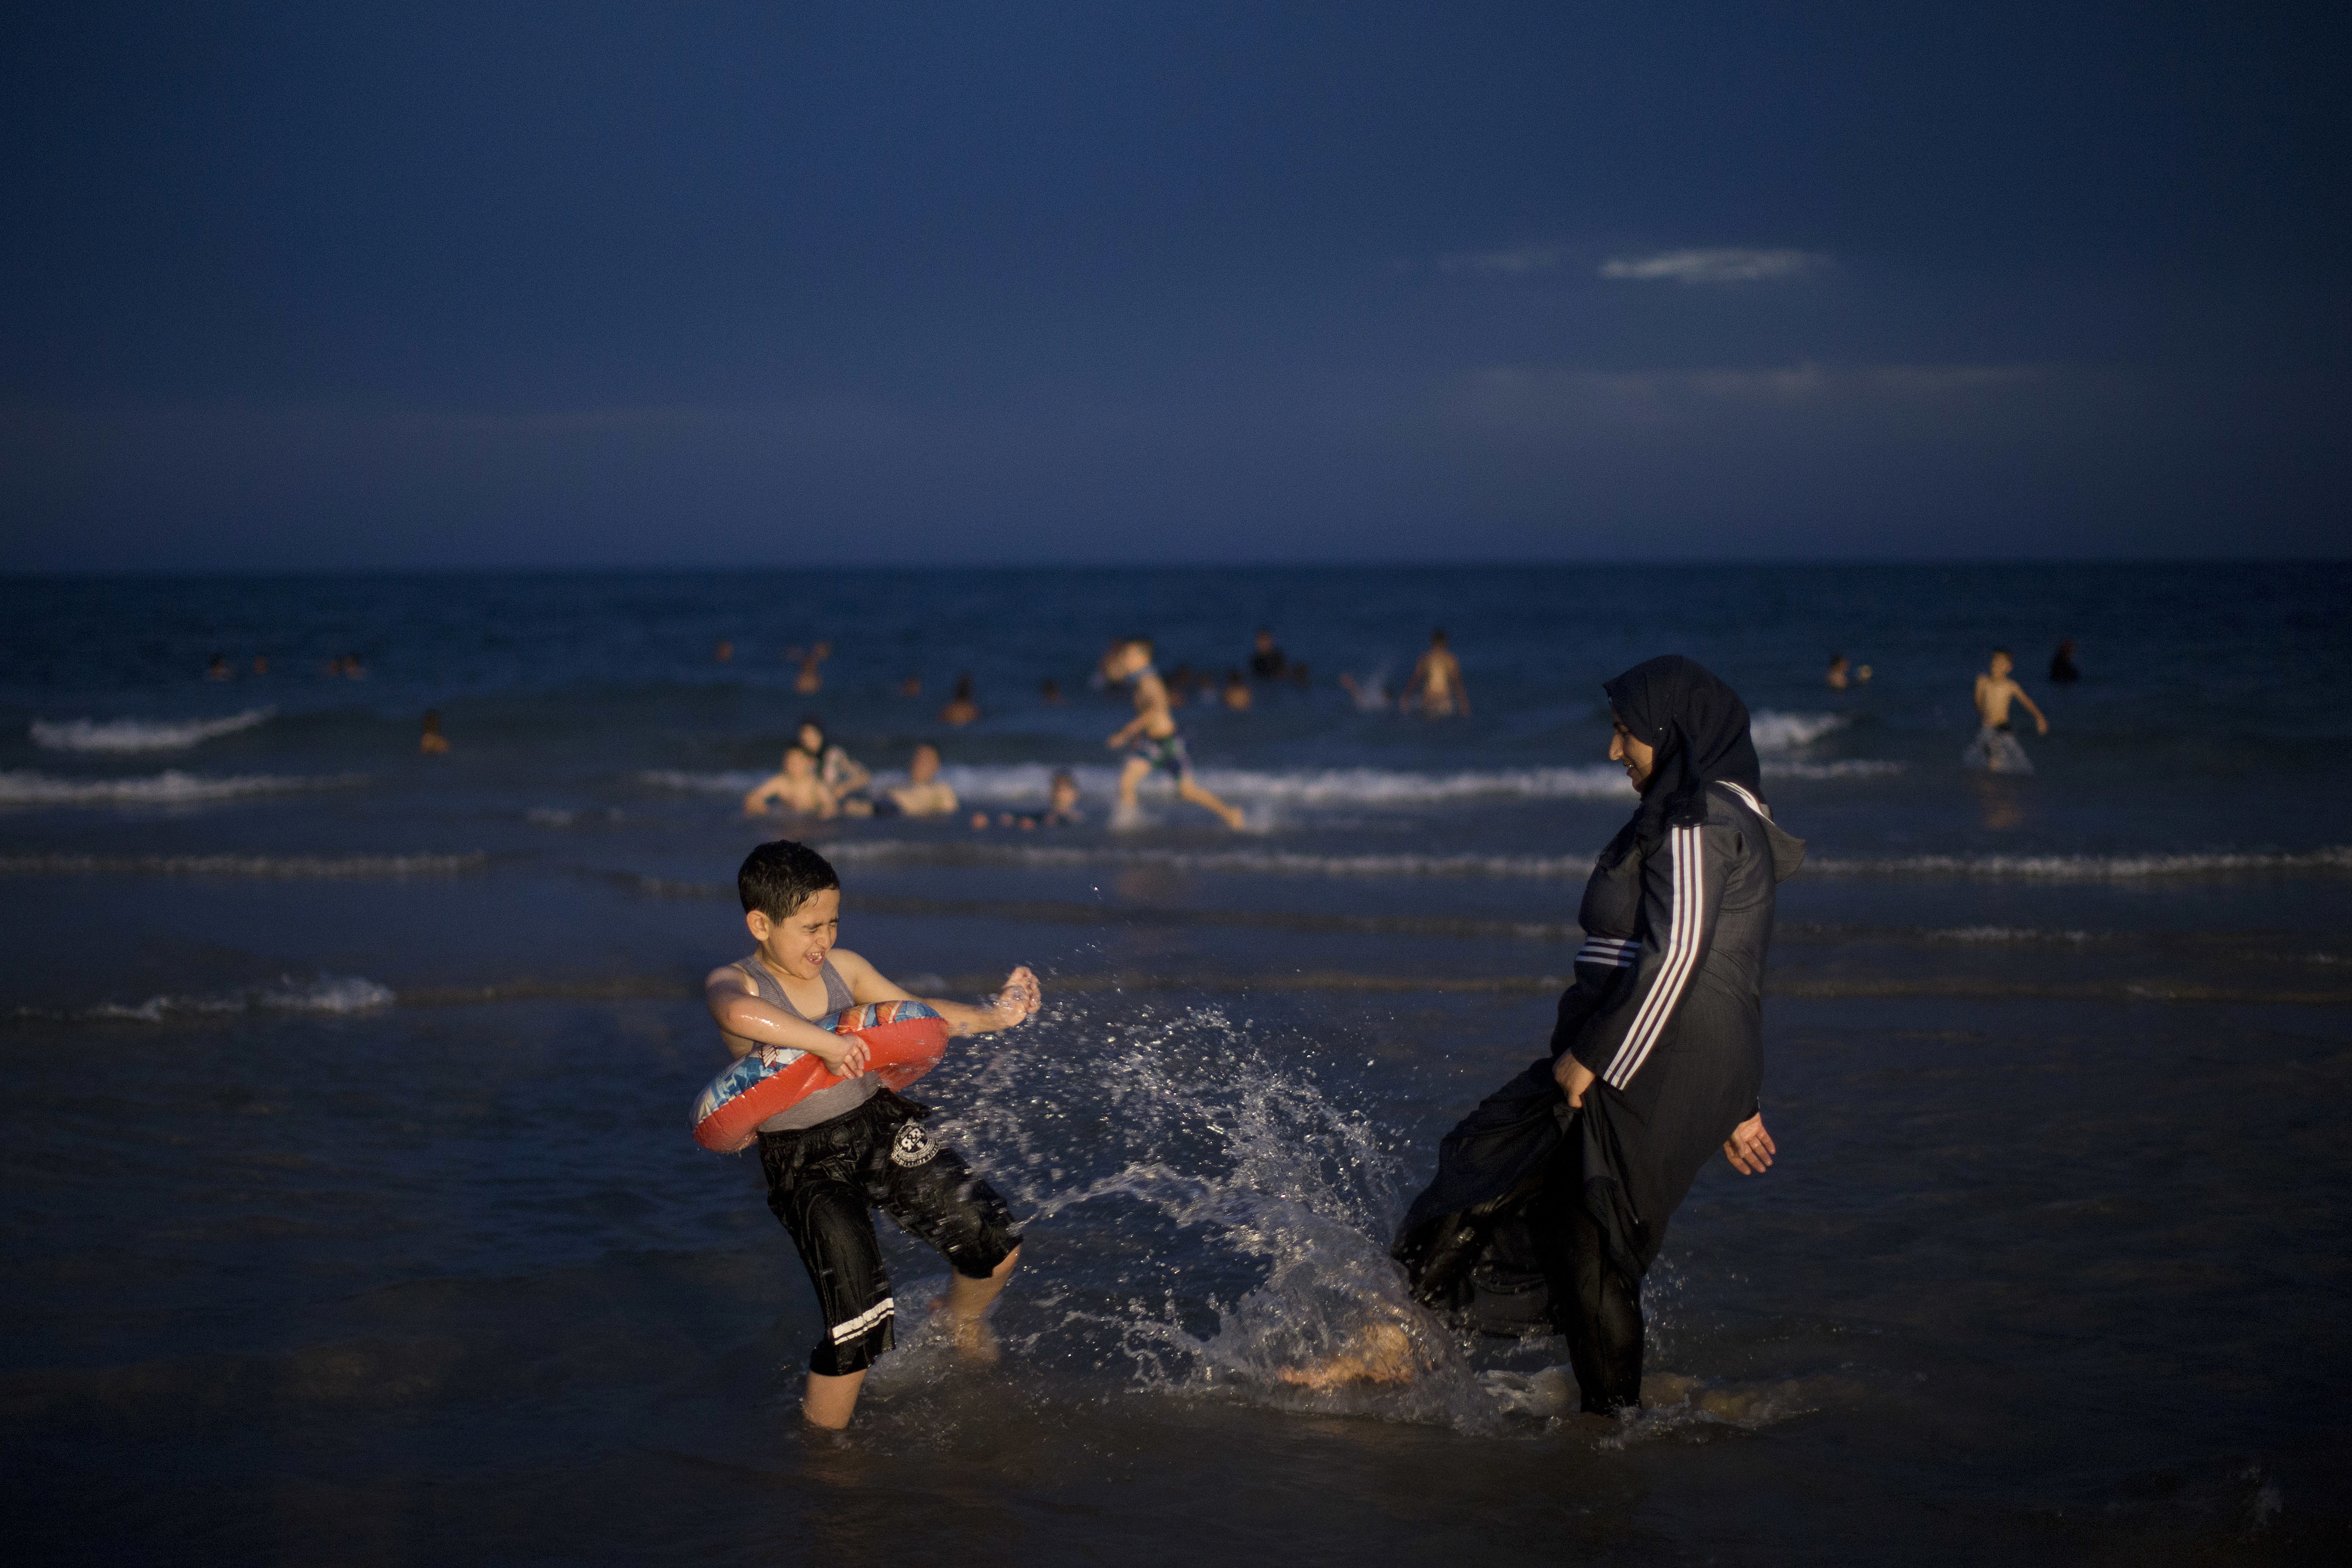 Palestinians spend the day on the beach during the Muslim Eid al-Fitr holiday in Tel Aviv, Israel, Saturday, June 16, 2018. Eid al-Fitr marks the end of the fasting month of Ramadan. (AP Photo/Oded Balilty)